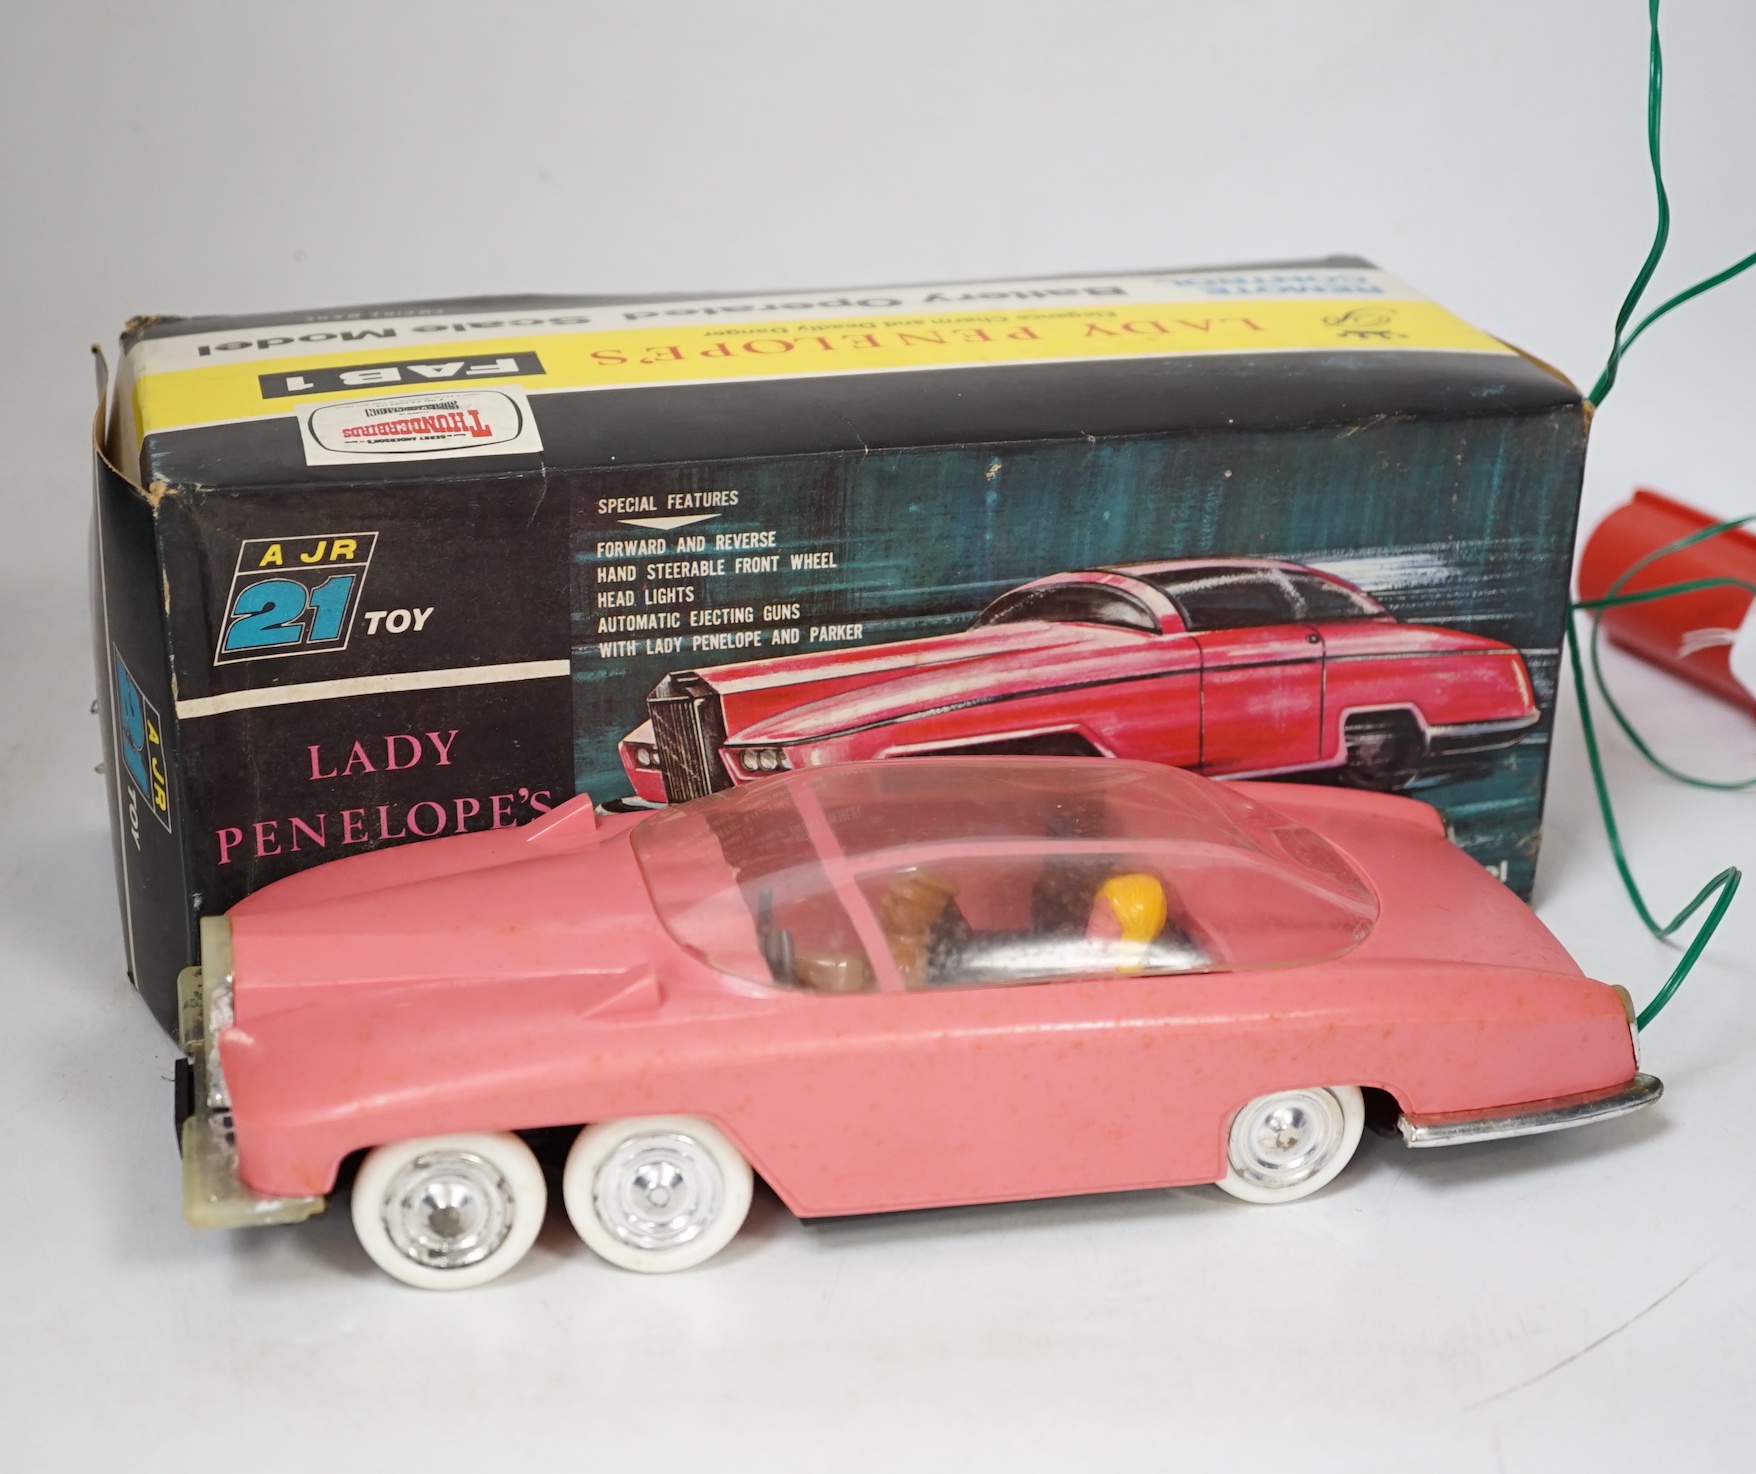 A boxed Rosenthal Toys Ltd (A JR 21 Toy) Thunderbirds remote control Lady Penelope’s FAB1 Rolls Royce